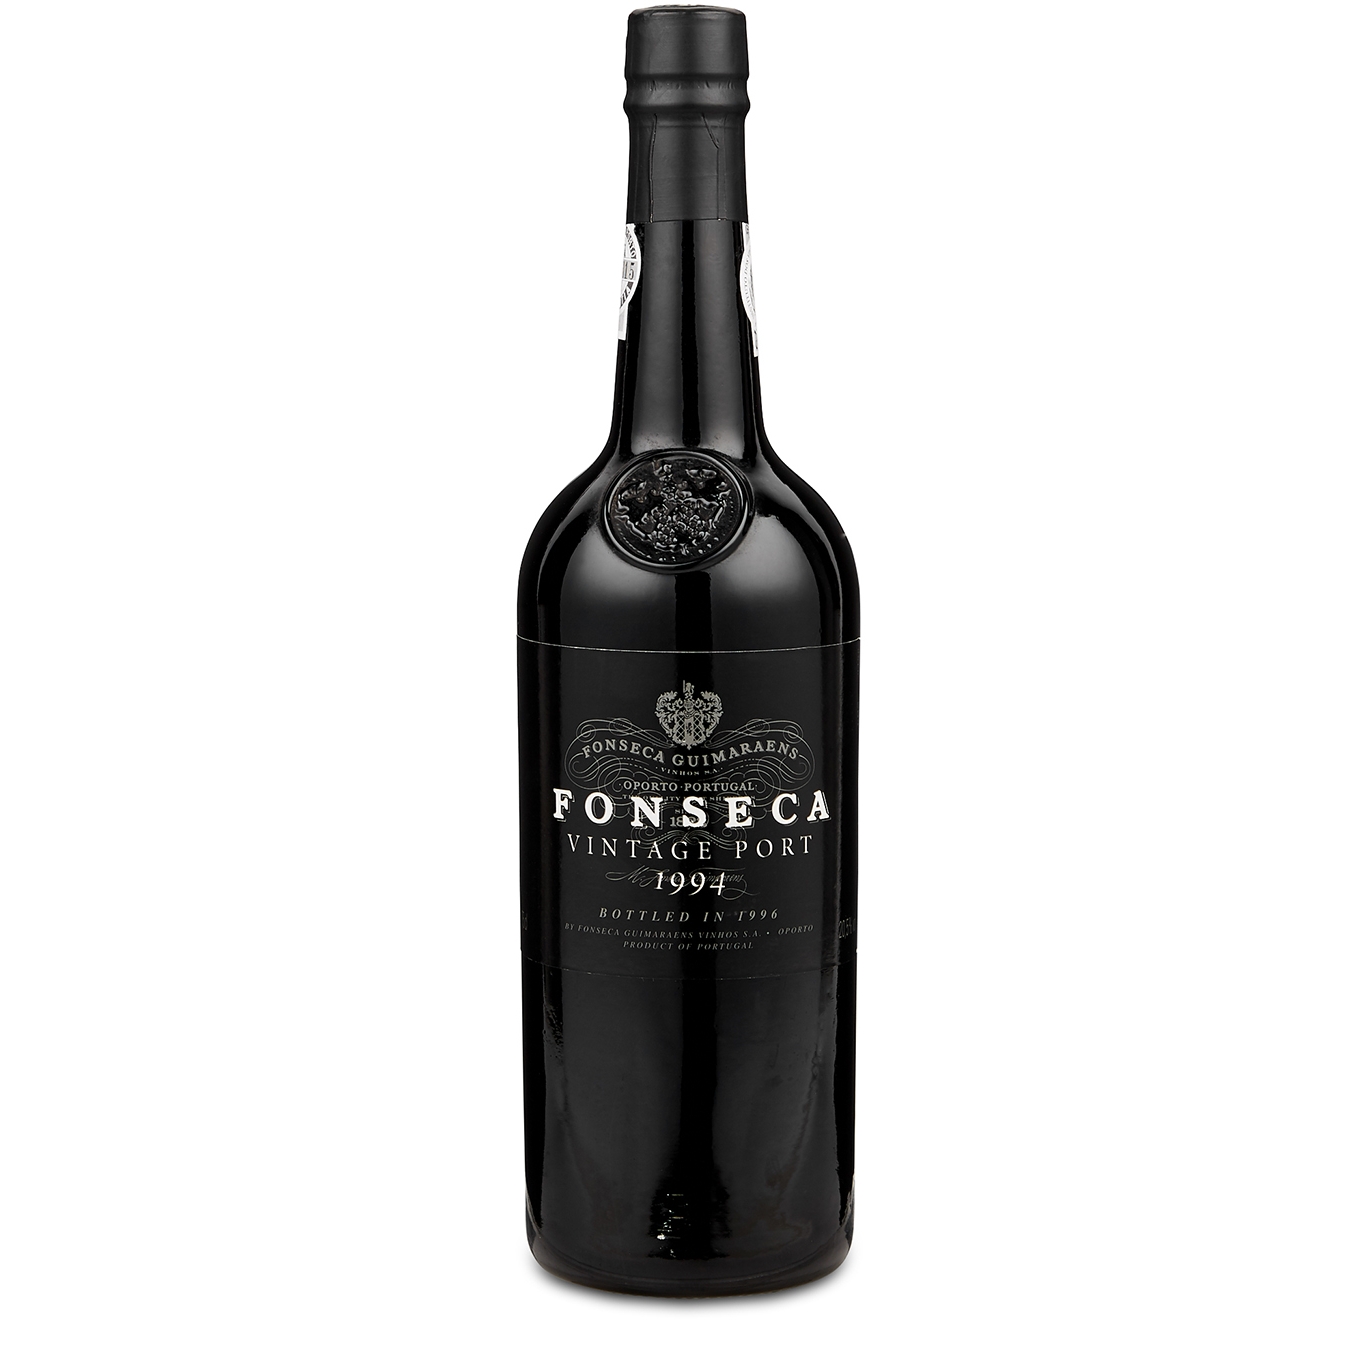 Fonseca Vintage Port 1994 Port And Fortified Wine